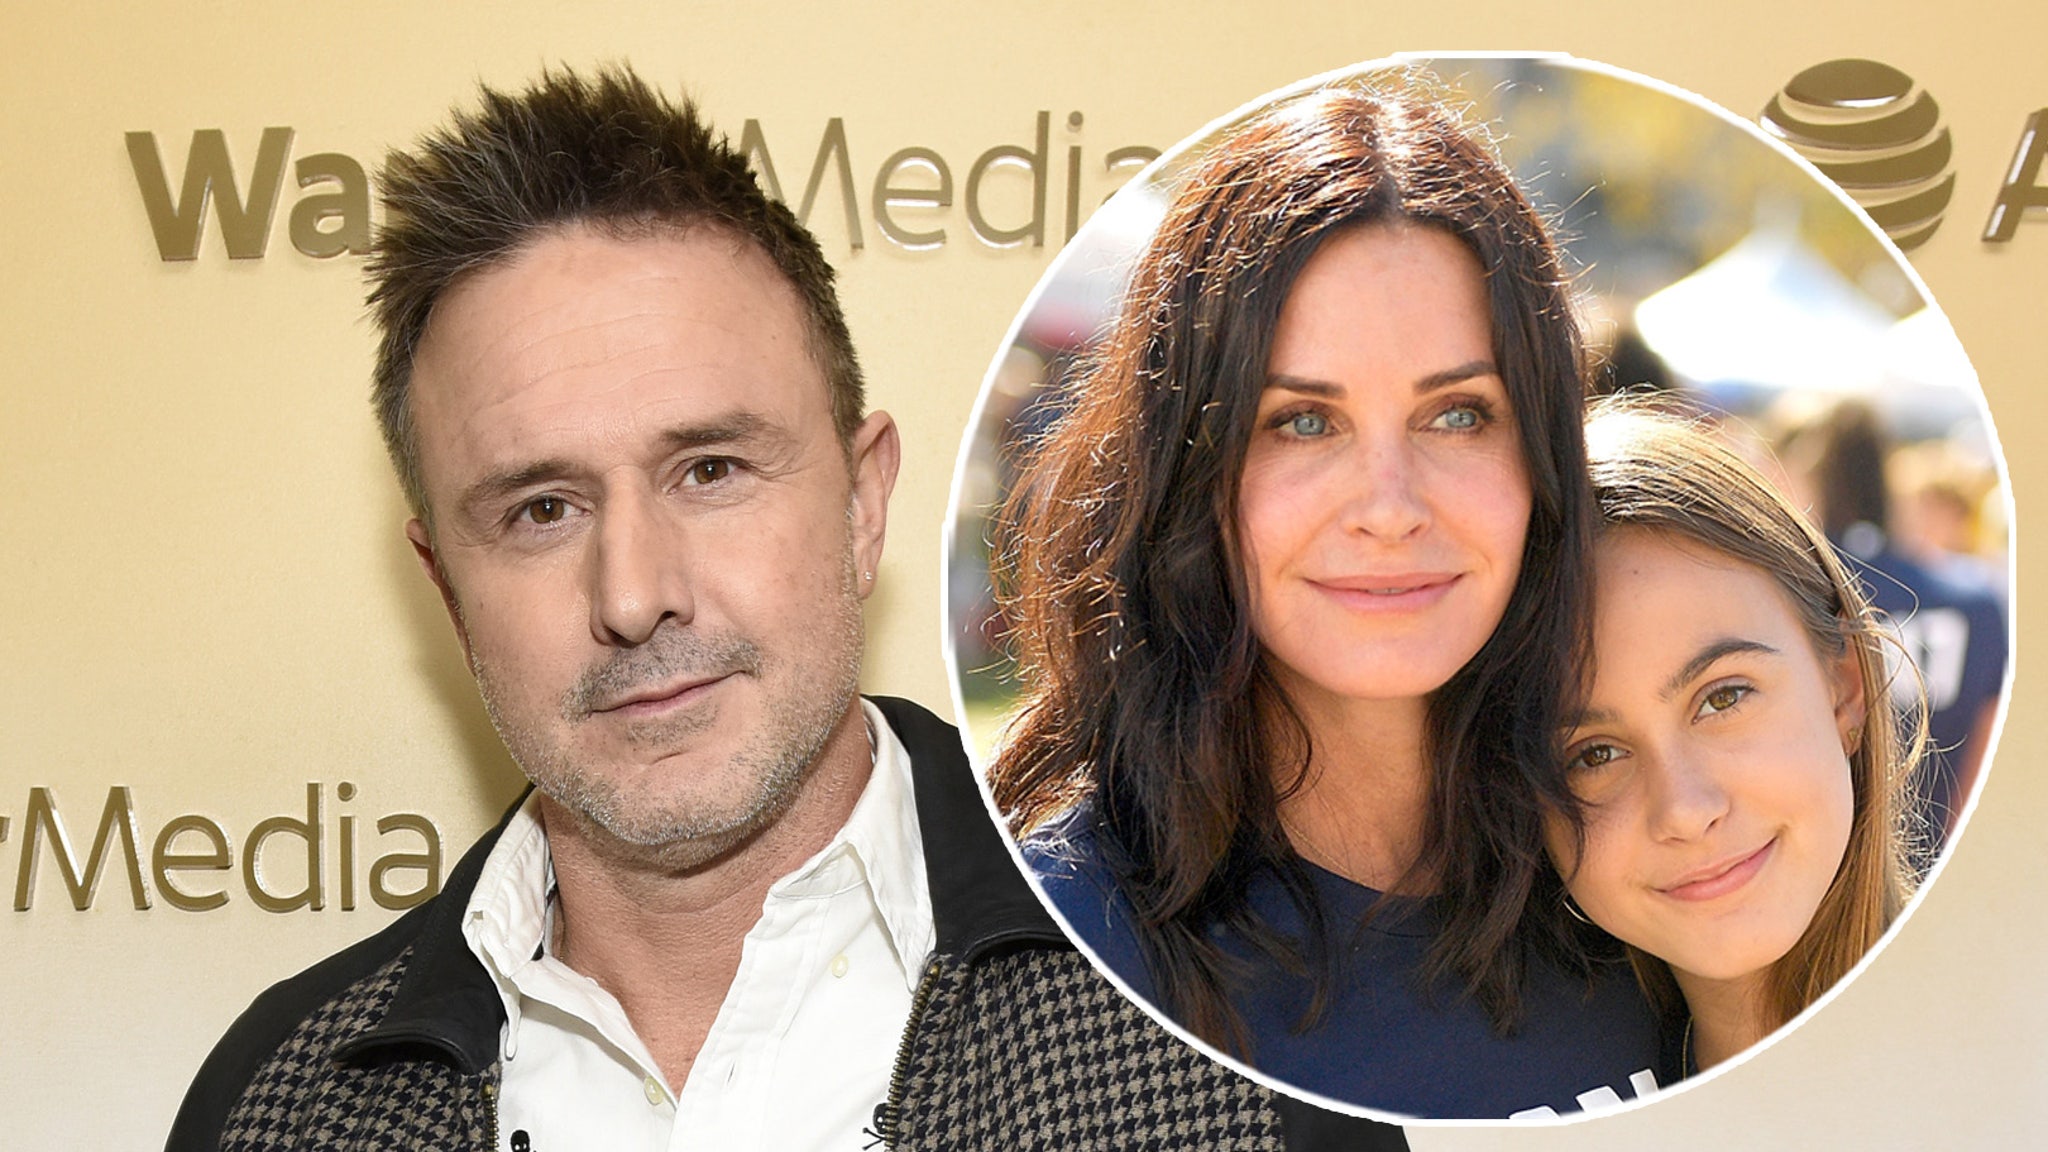 David Arquette wants to apologize to daughter Coco for divorce